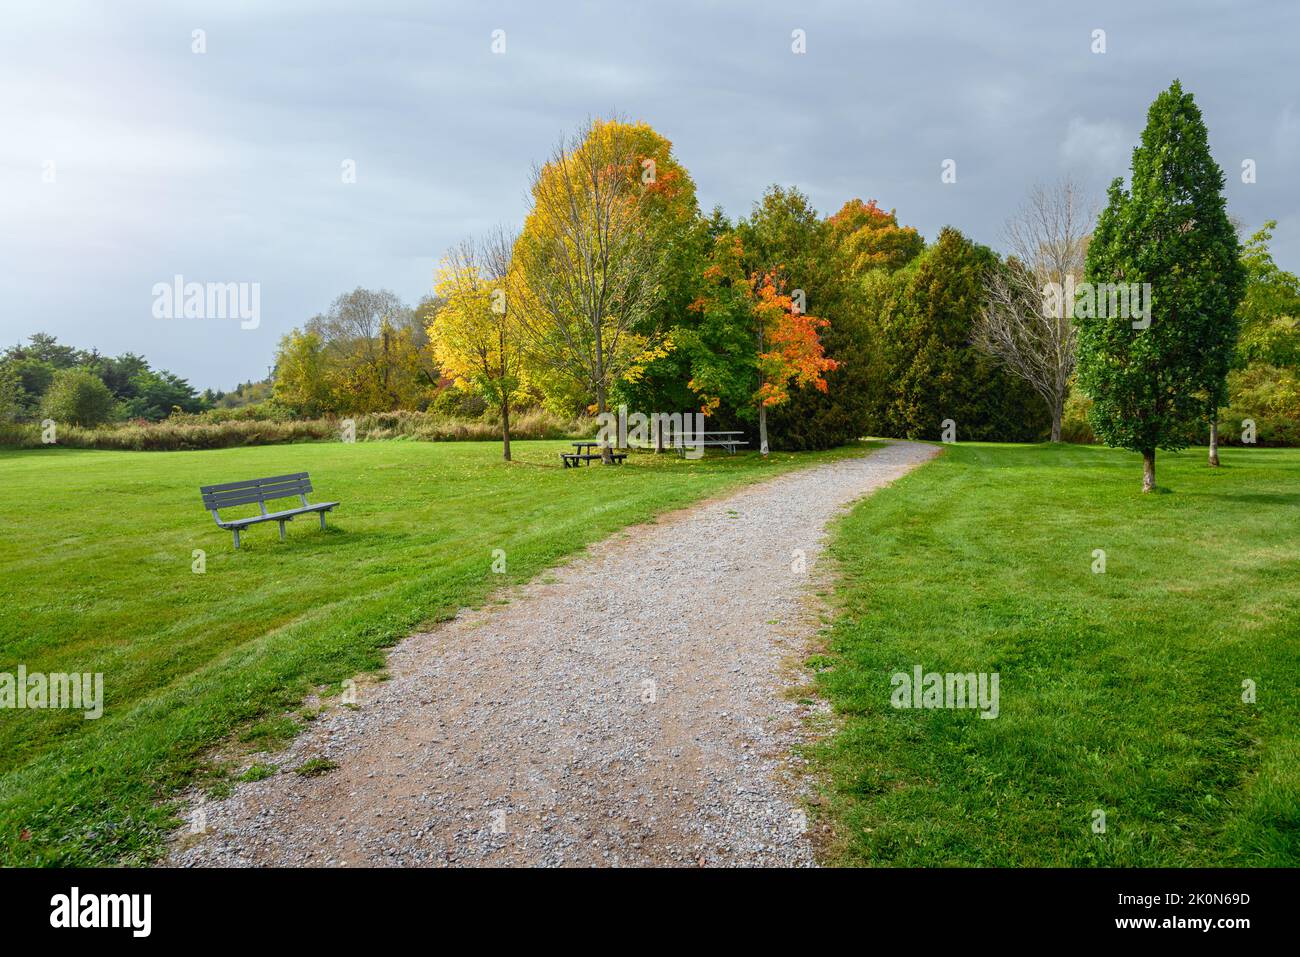 Deserted gravel footpath lined with benches and picnic tables leading through woods in a park under stormy sky in autumn Stock Photo